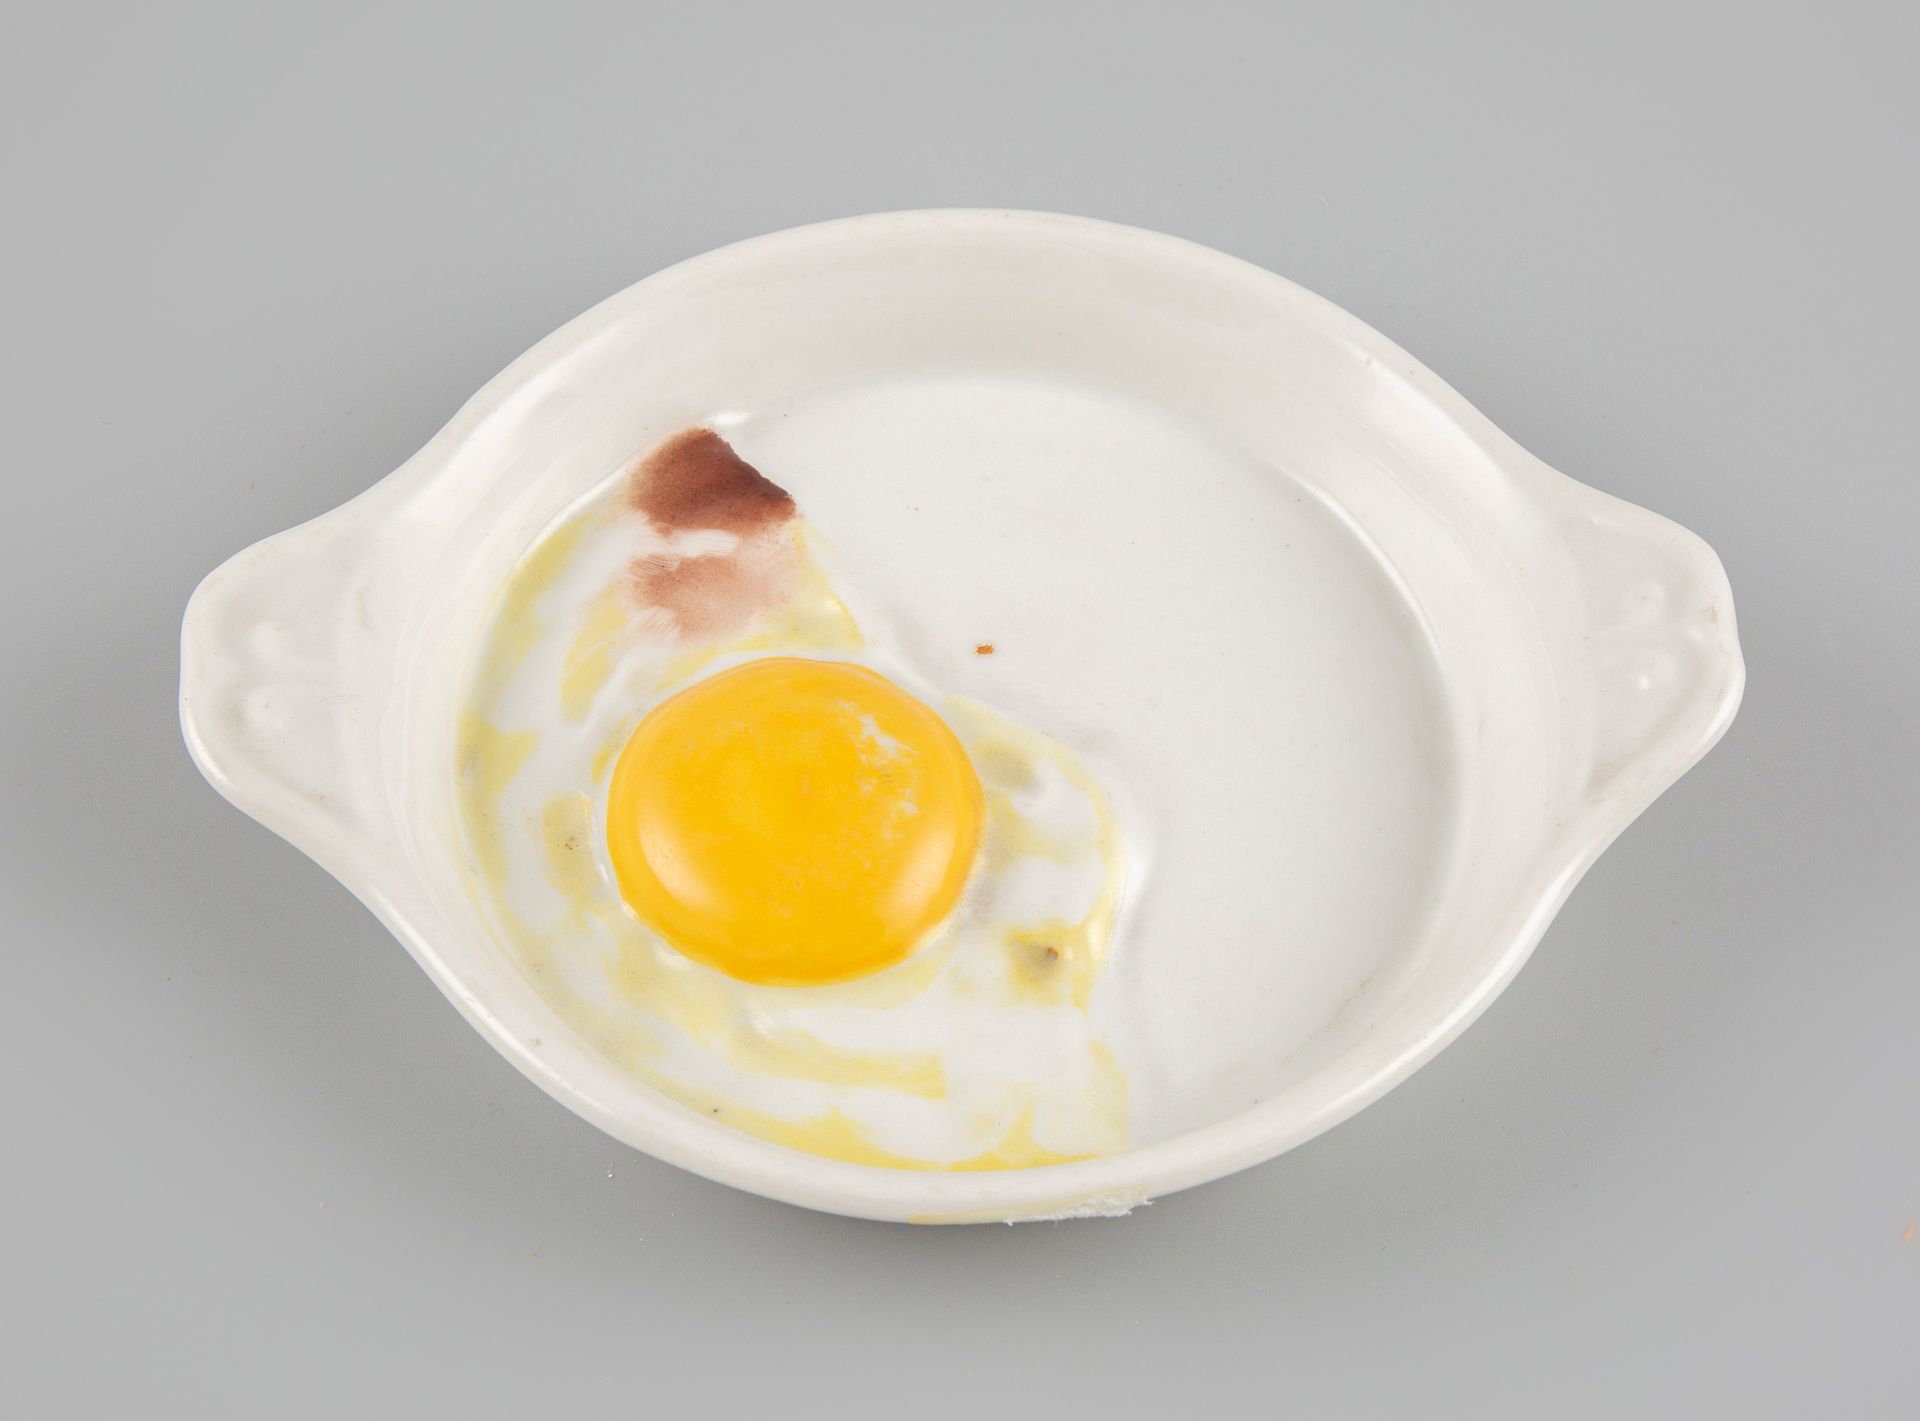 Null Paris, Edition Georges Dreyfus, The fried egg

Porcelain. The cooked egg is&hellip;